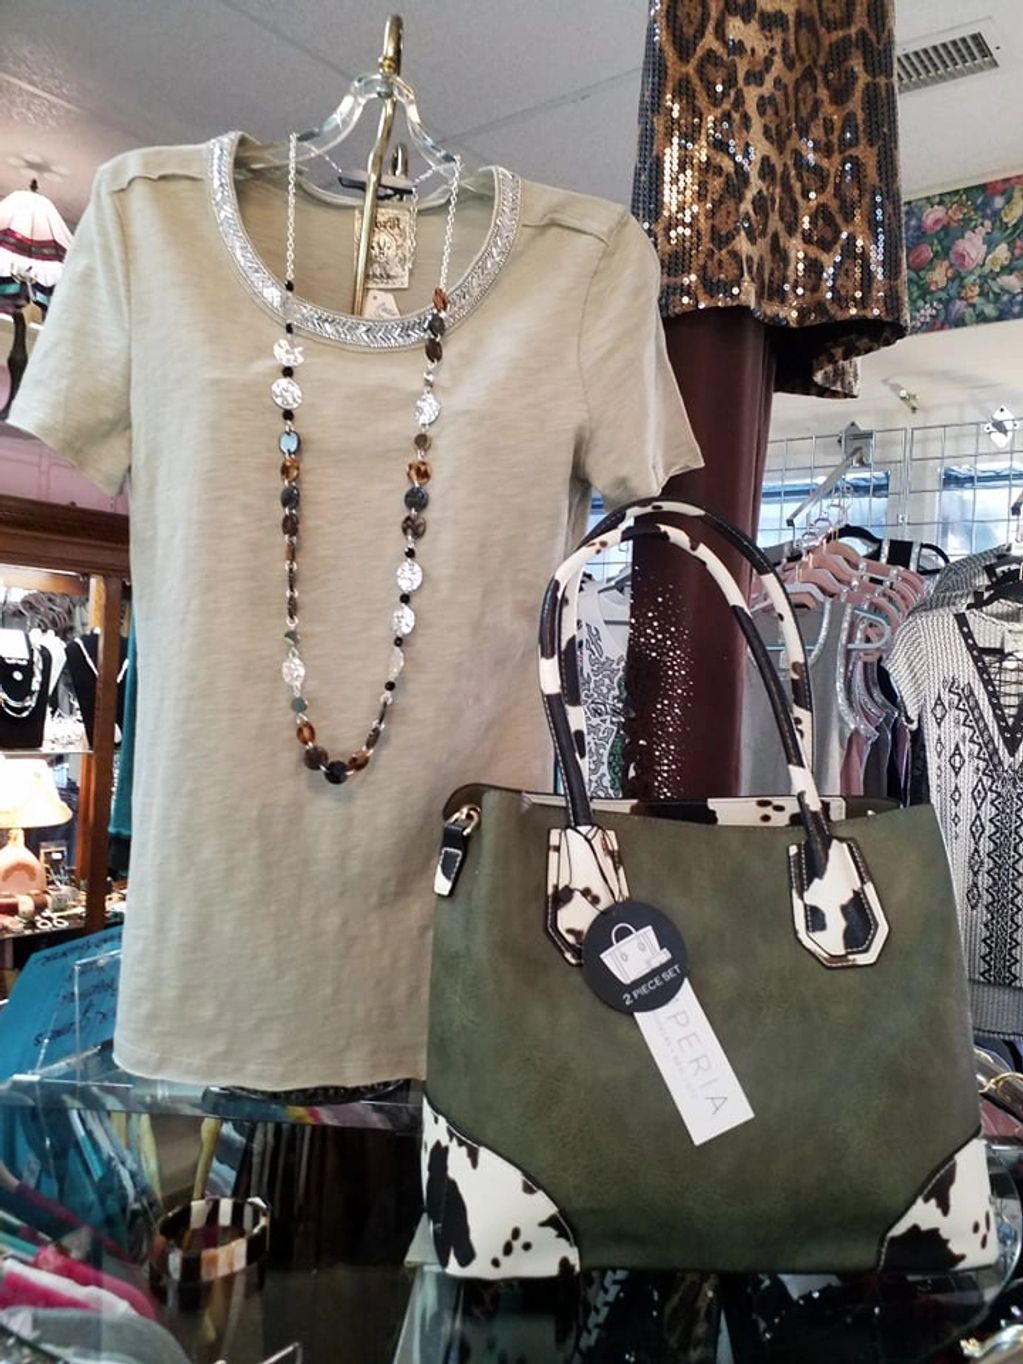 Beautiful Classy Top with Rhinestone Neck and short sleeves, paired with a beautful necklace and han